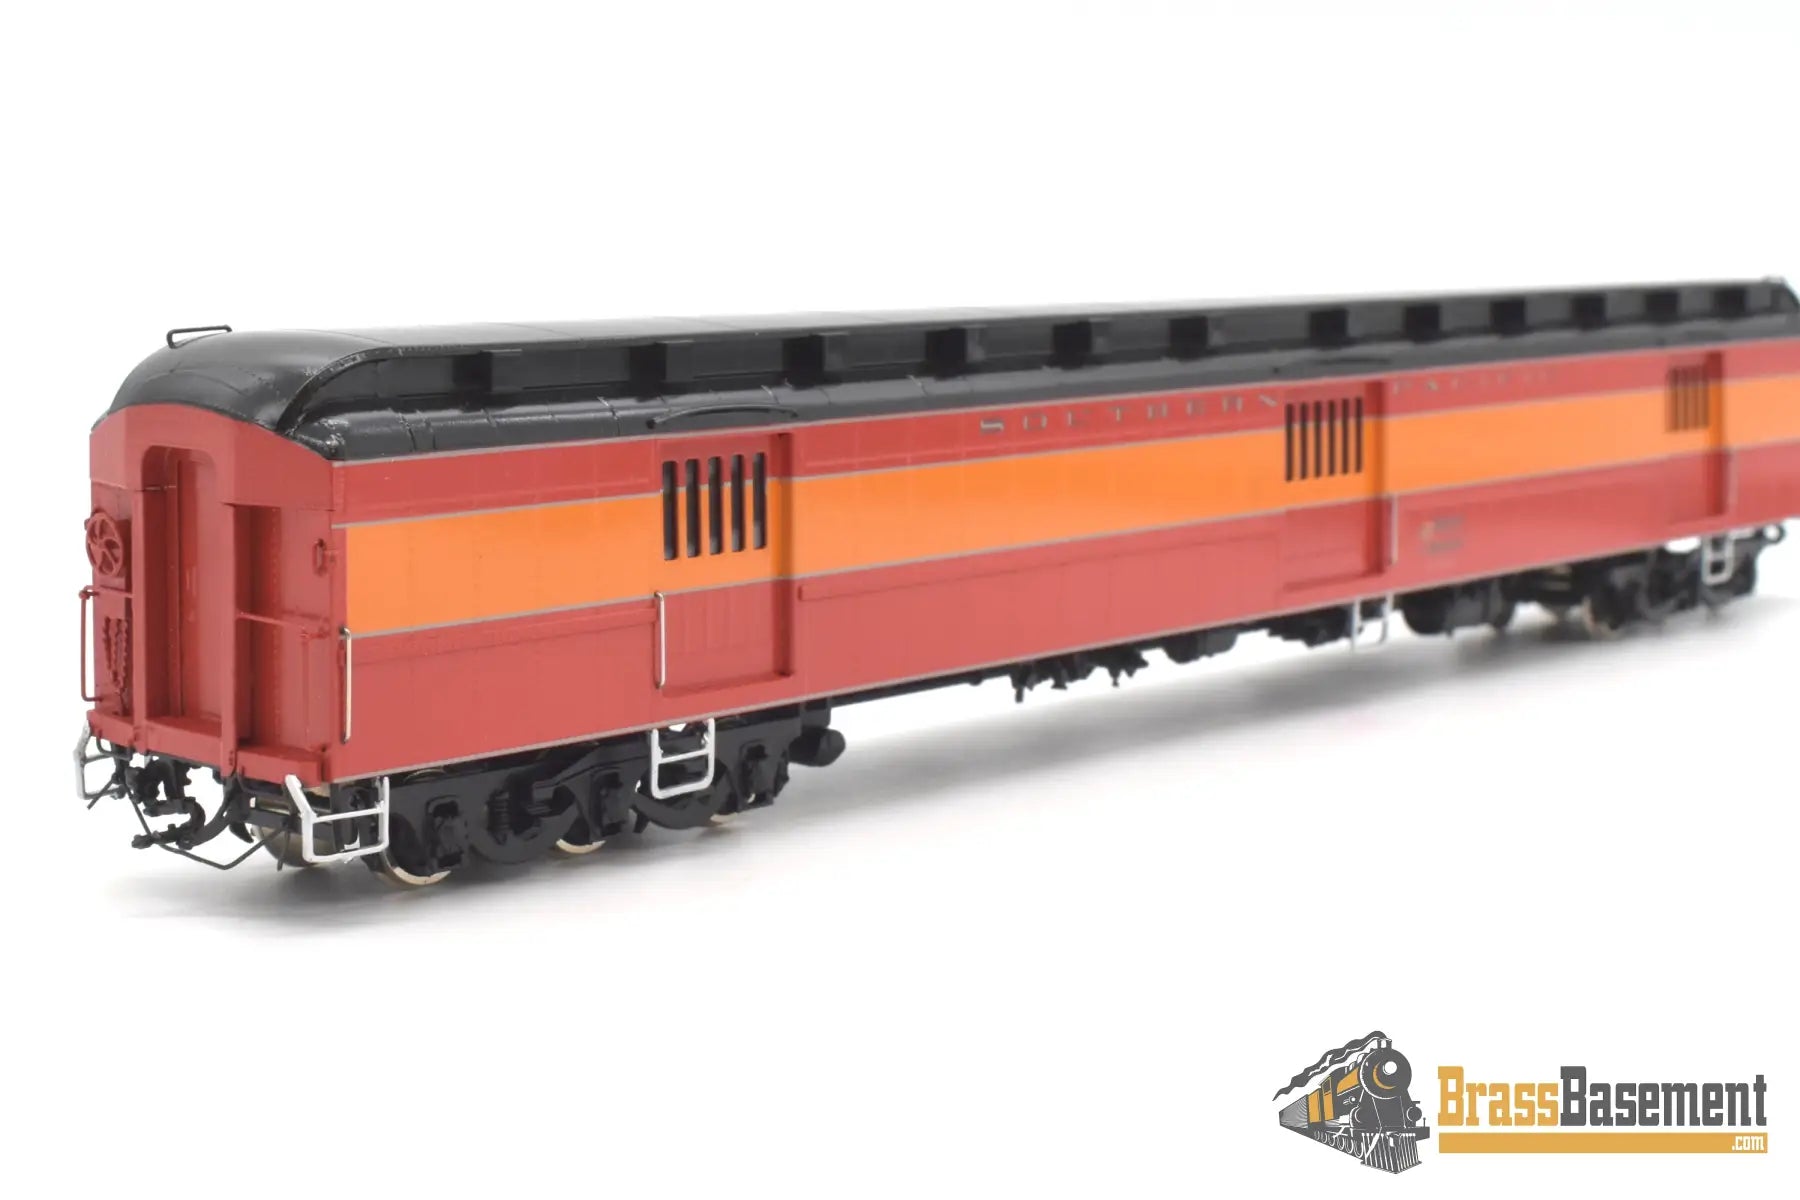 Ho Brass - Tcy 0926 Southern Pacific Sp 6505 Hw 80 - B Express Baggage Ex Horse Car Daylight 1 Of